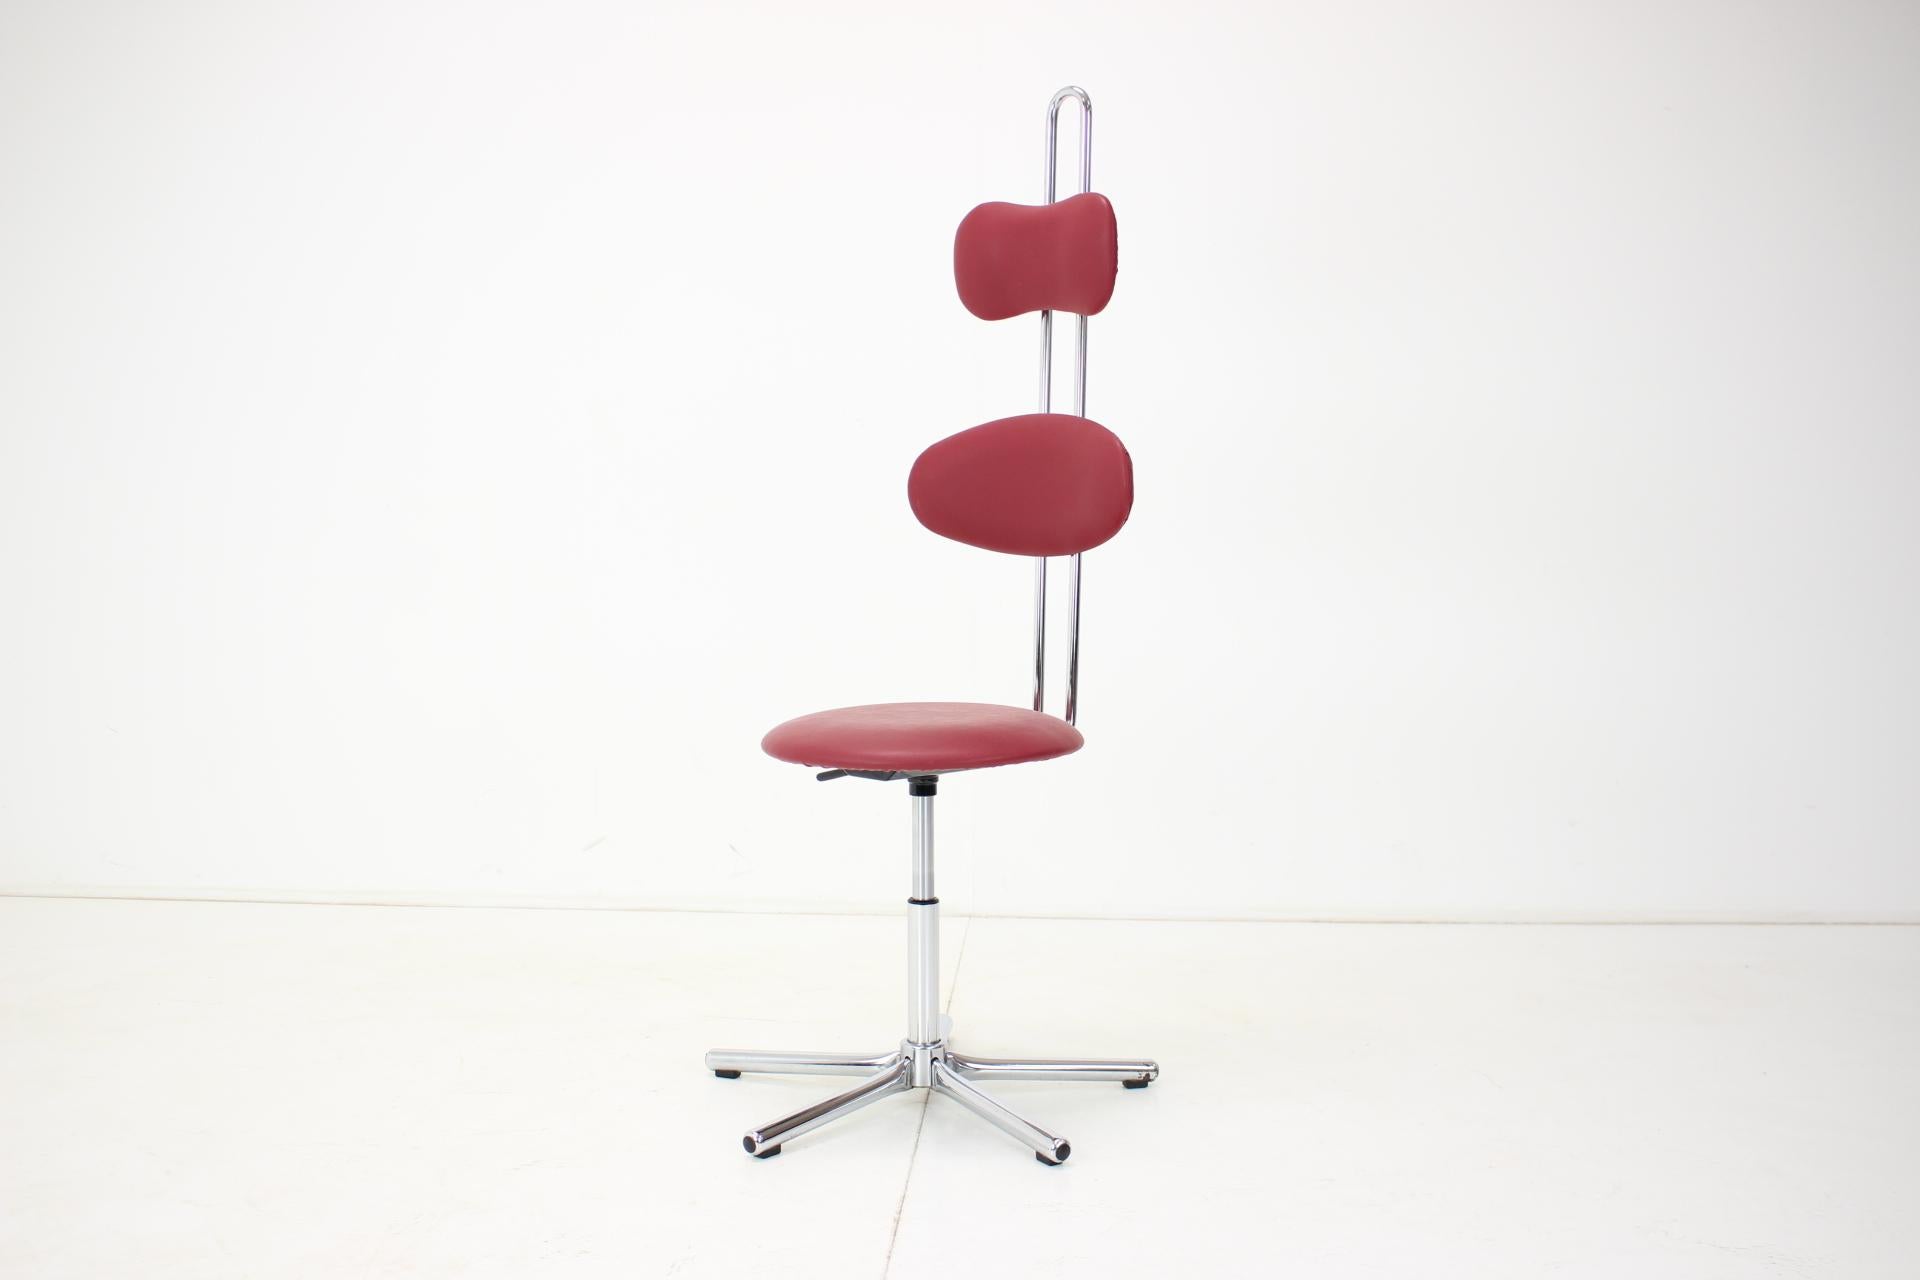 - Good condition
- Adjustable height 37-52 cm
- Leatherette
- Height-adjustable and folding backrests.